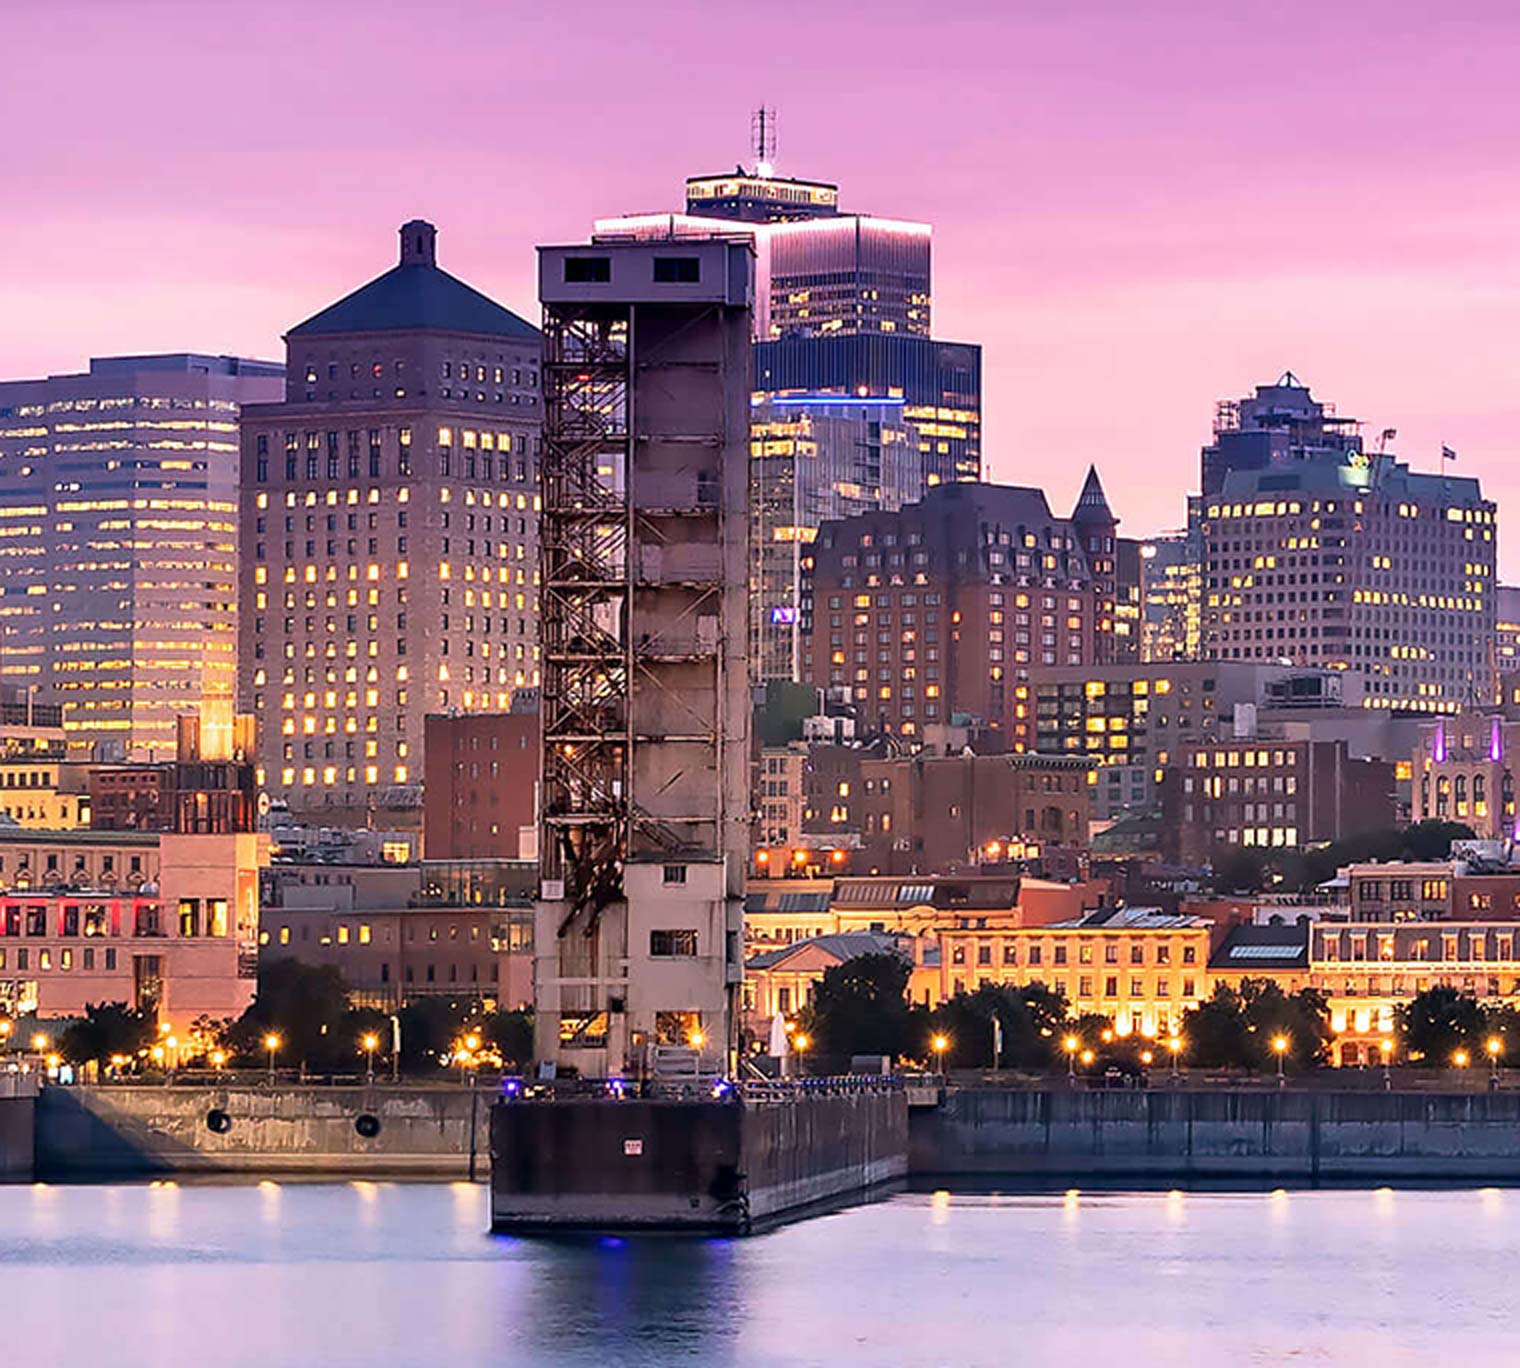 Montreal skyline at night, showing St. Lawrence River; Quebec, Canada